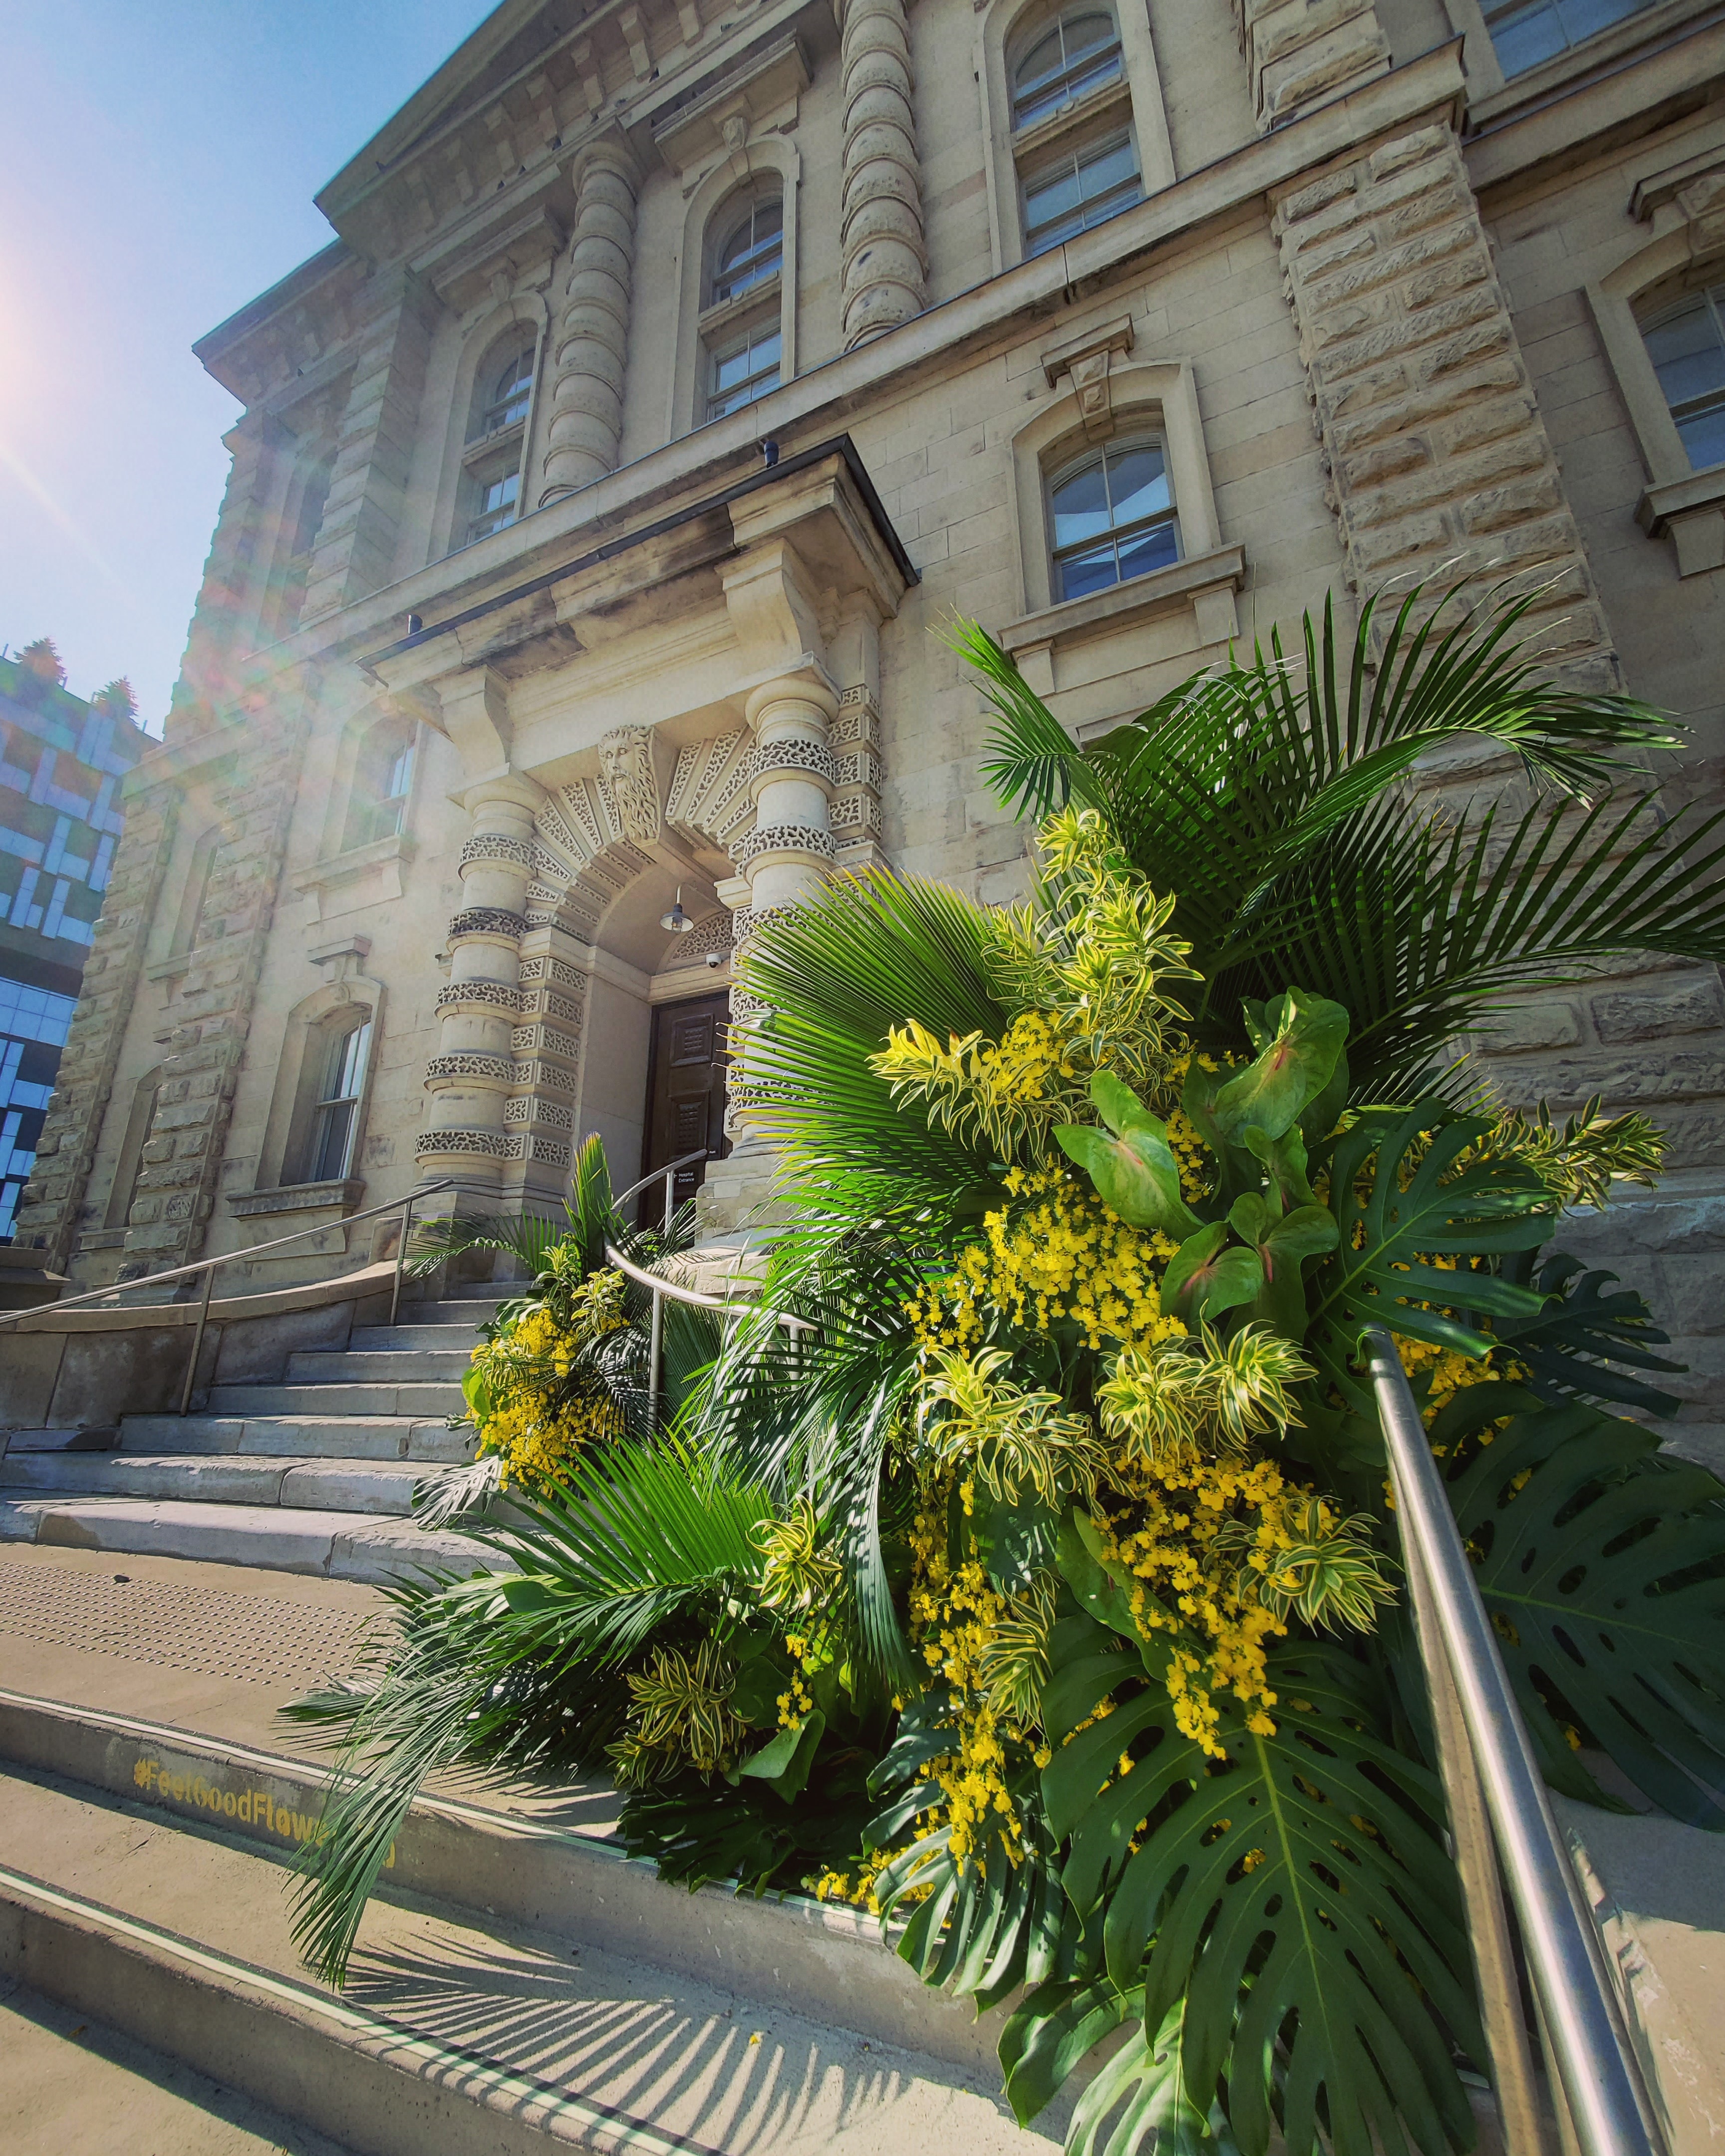 A large green and yellow flower arrangement on some stairs in front of a large old stone building